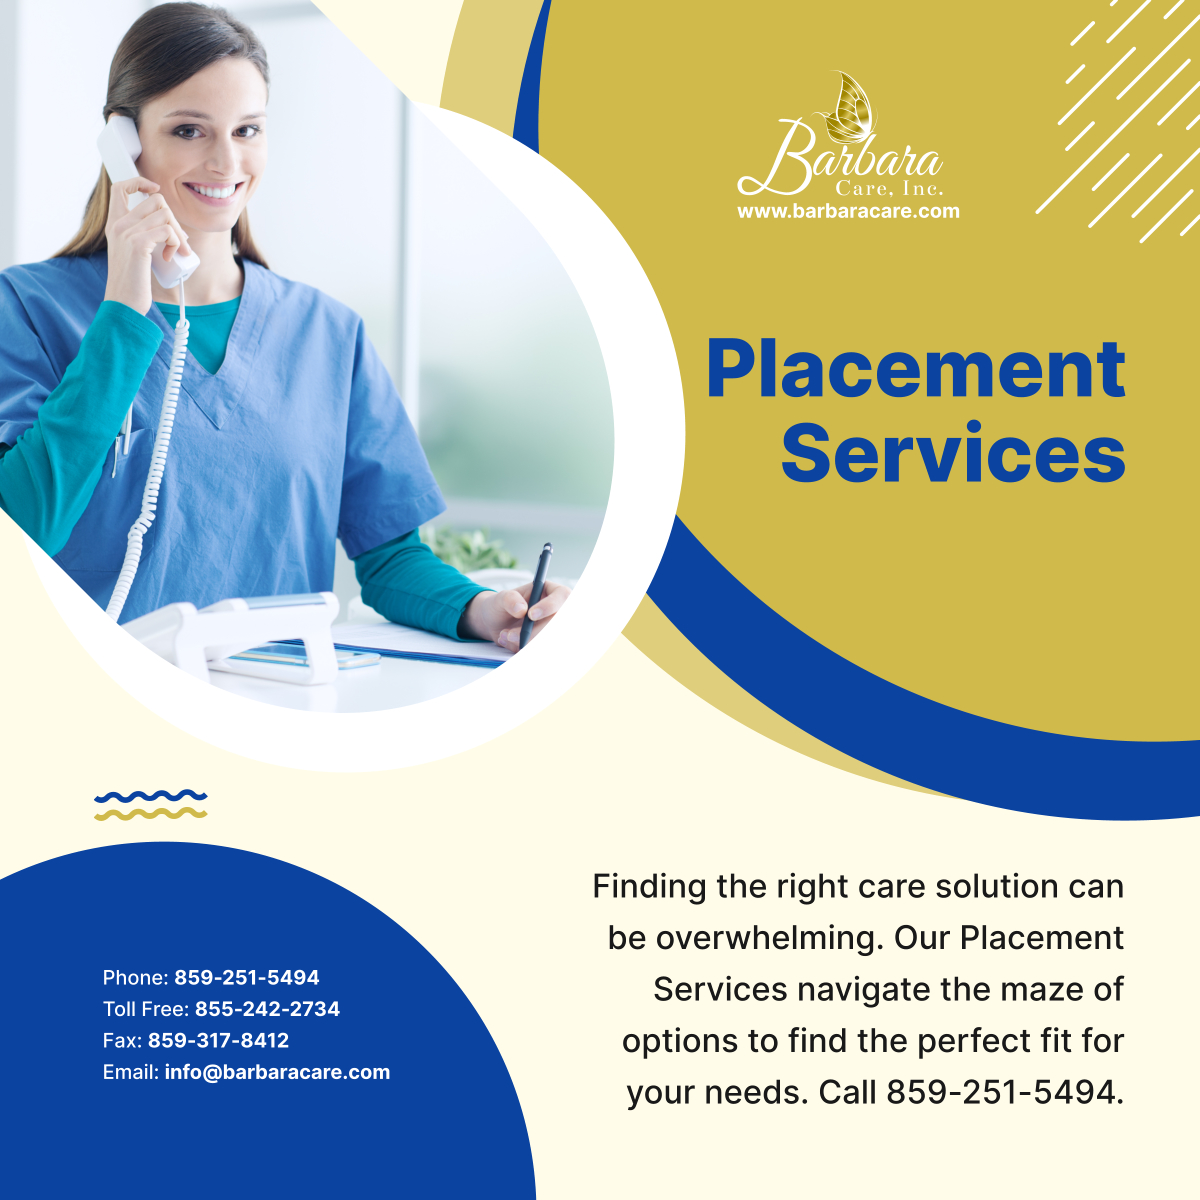 Your guide to the best care options. From living assistance to nursing homes, our Placement Services match you with ideal solutions. Start exploring today. 

#PlacementServices #CareOptions #LexingtonKentucky #HomeCare #FindThePerfectFit